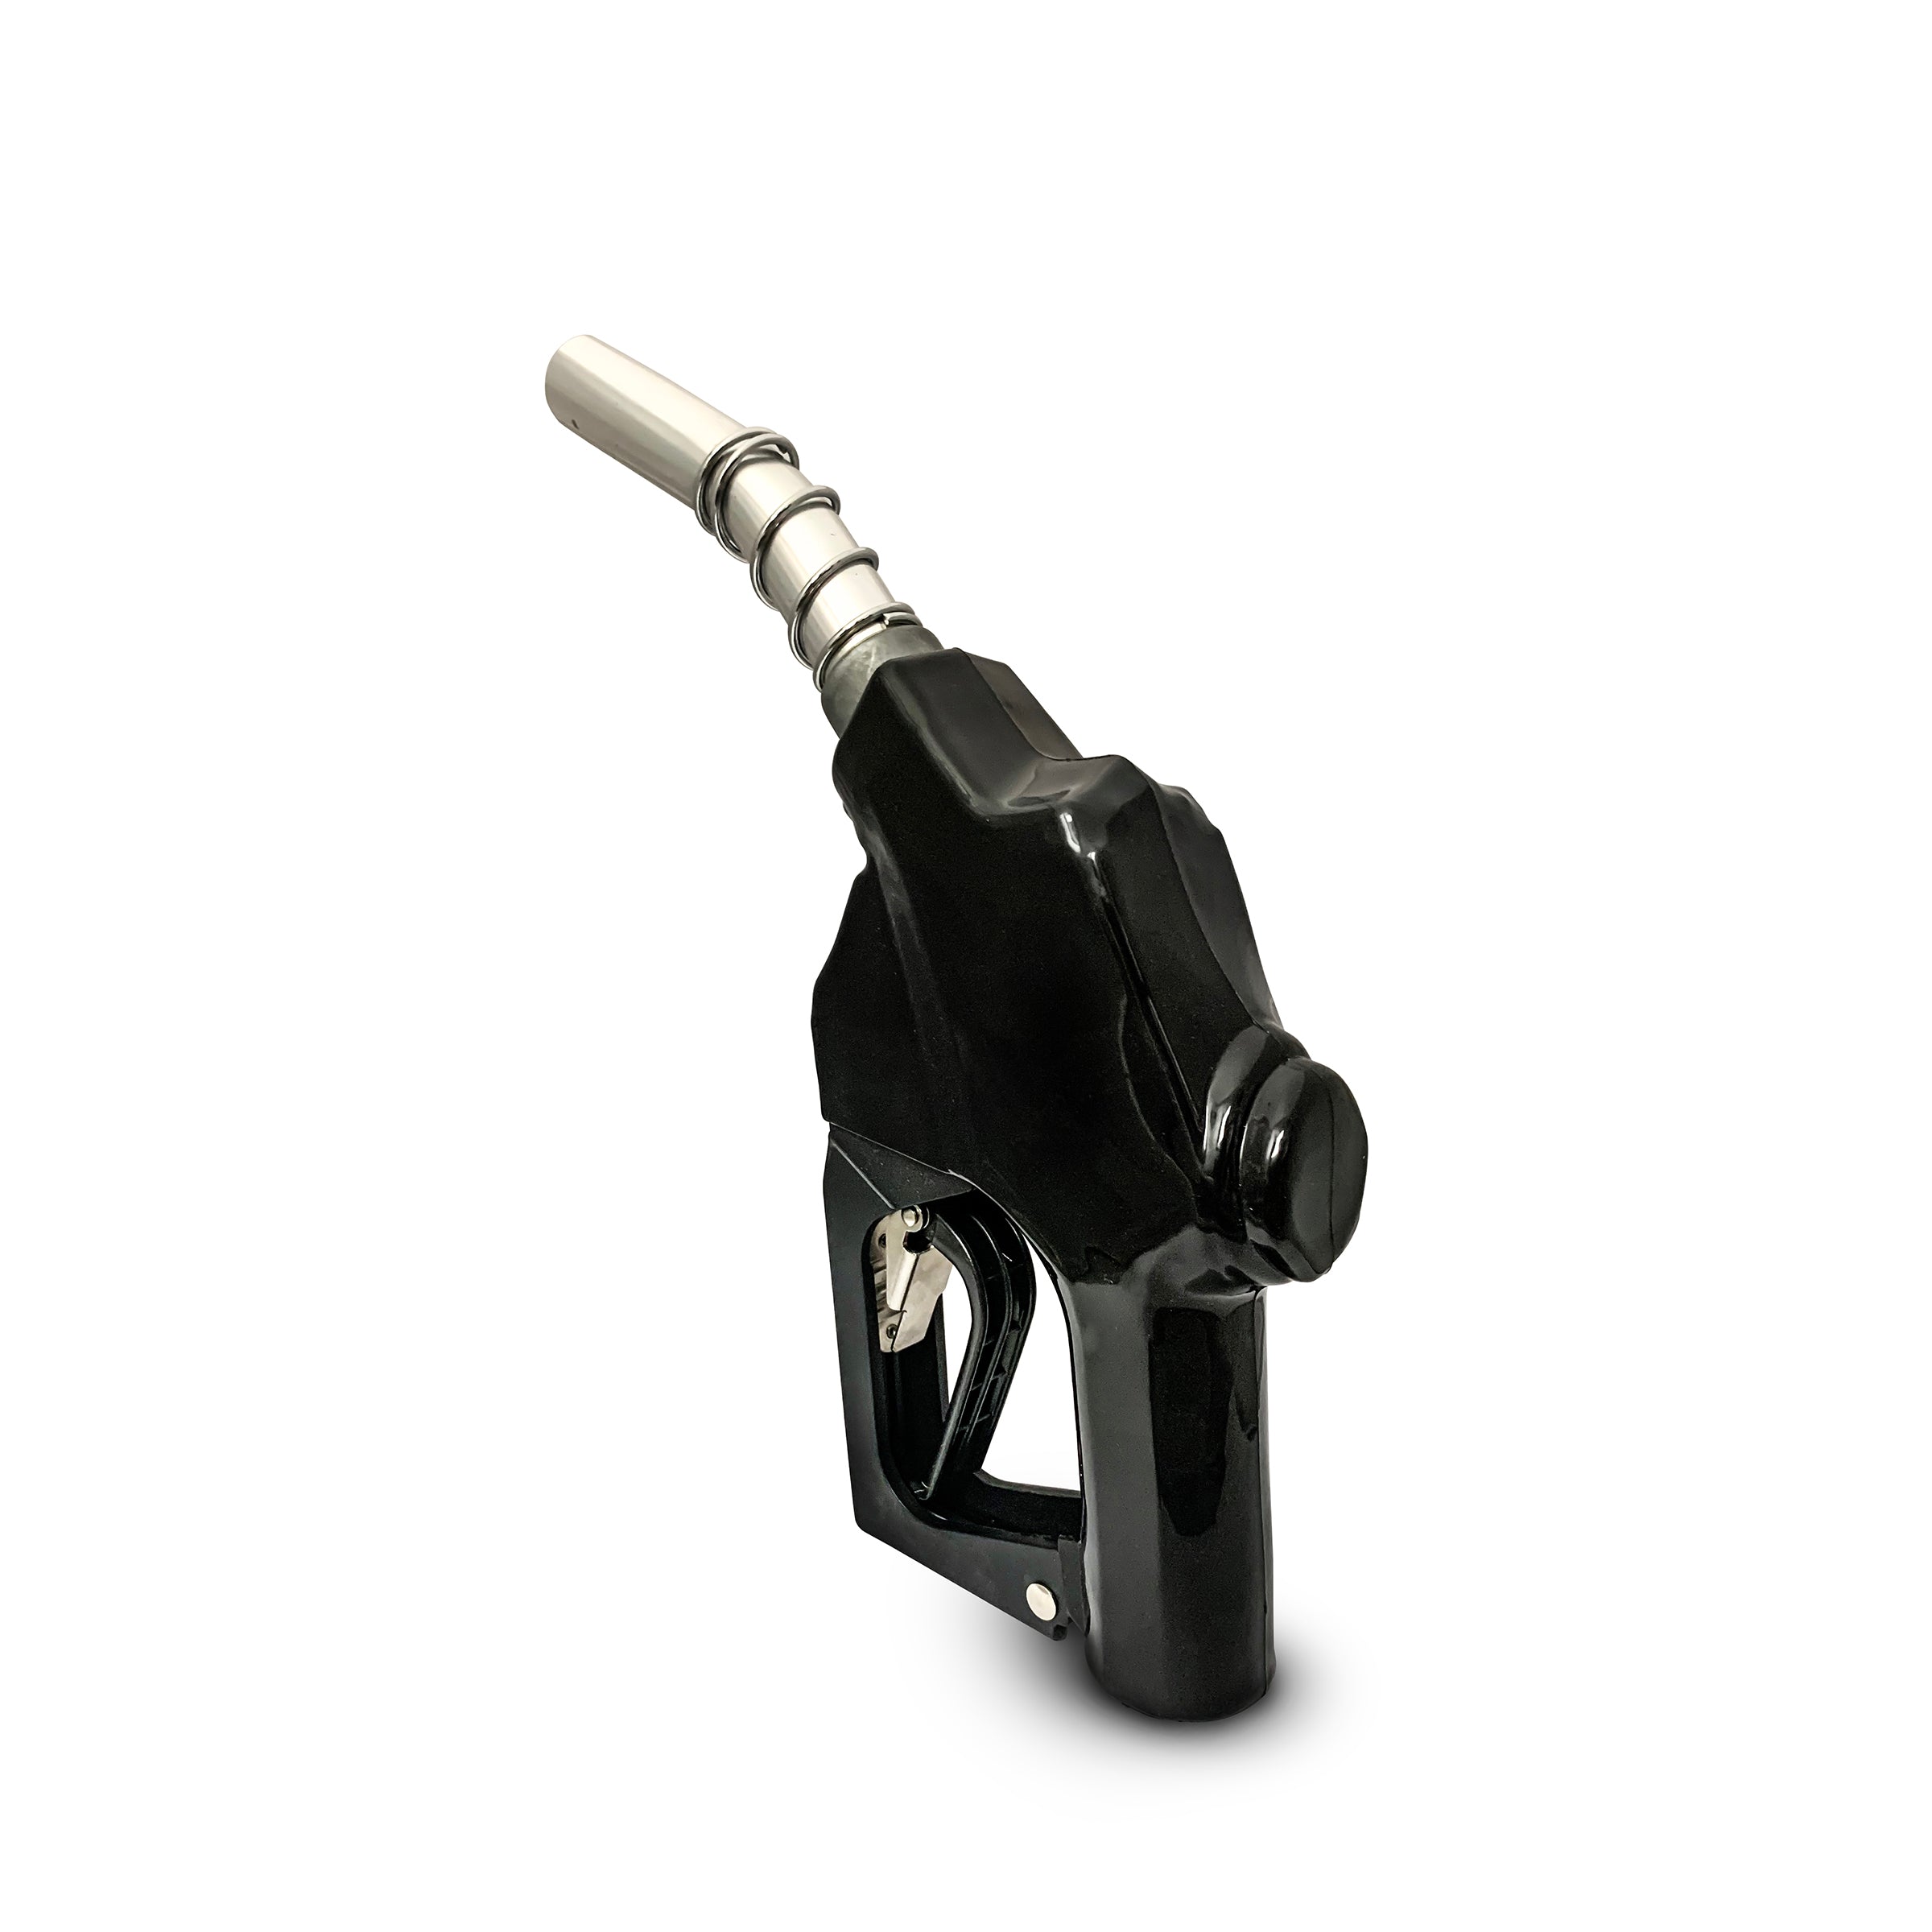 fuel nozzle with auto shut off for diesel or unleaded